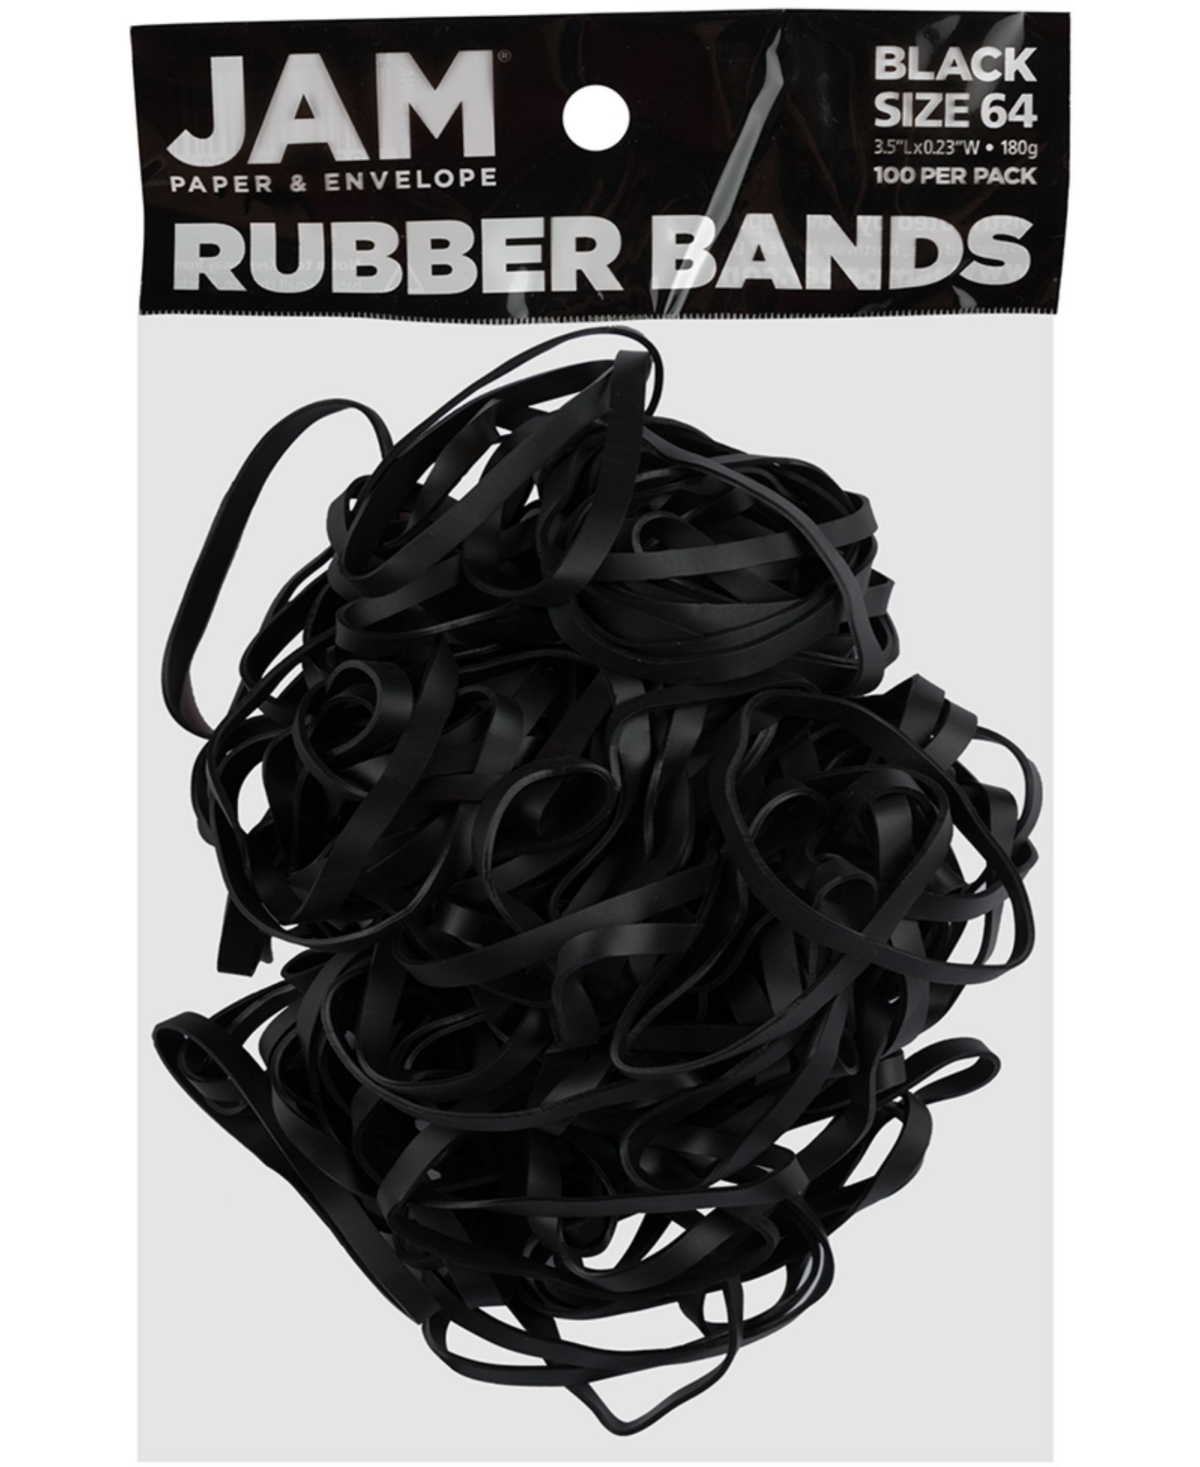 Jam Paper Durable Rubber Bands In Black